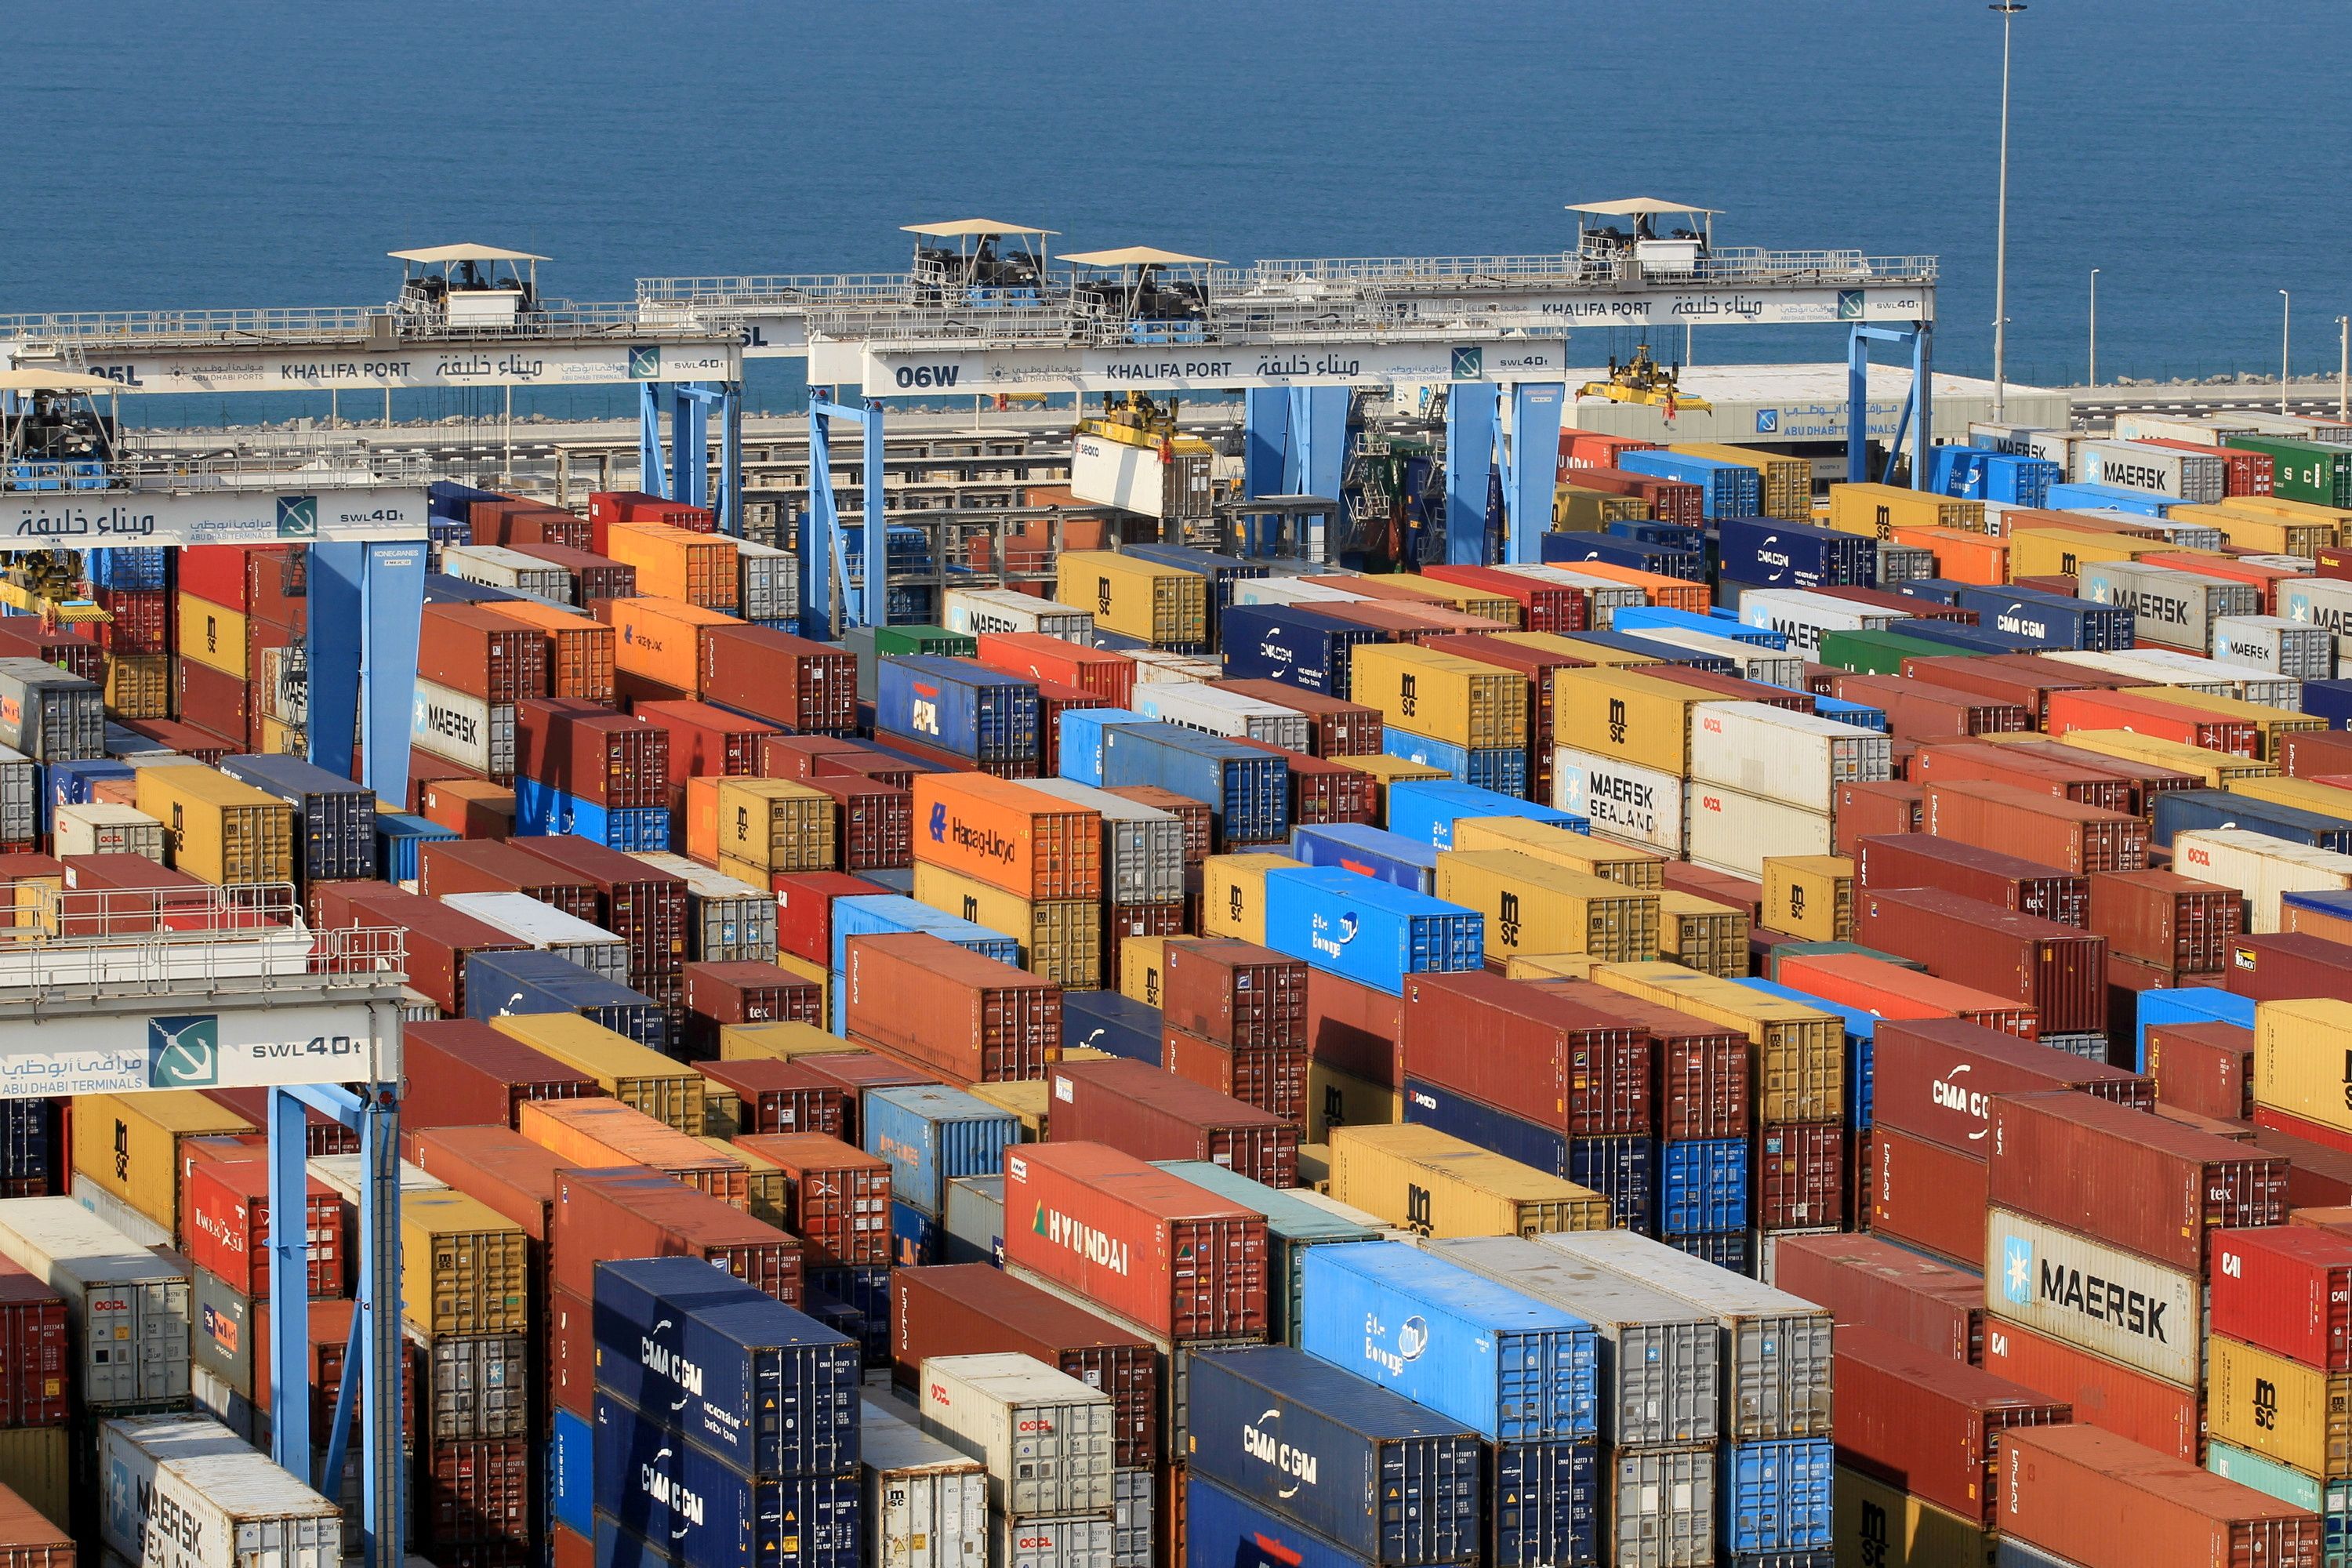 Containers are seen at Abu Dhabi's Khalifa Port, UAE